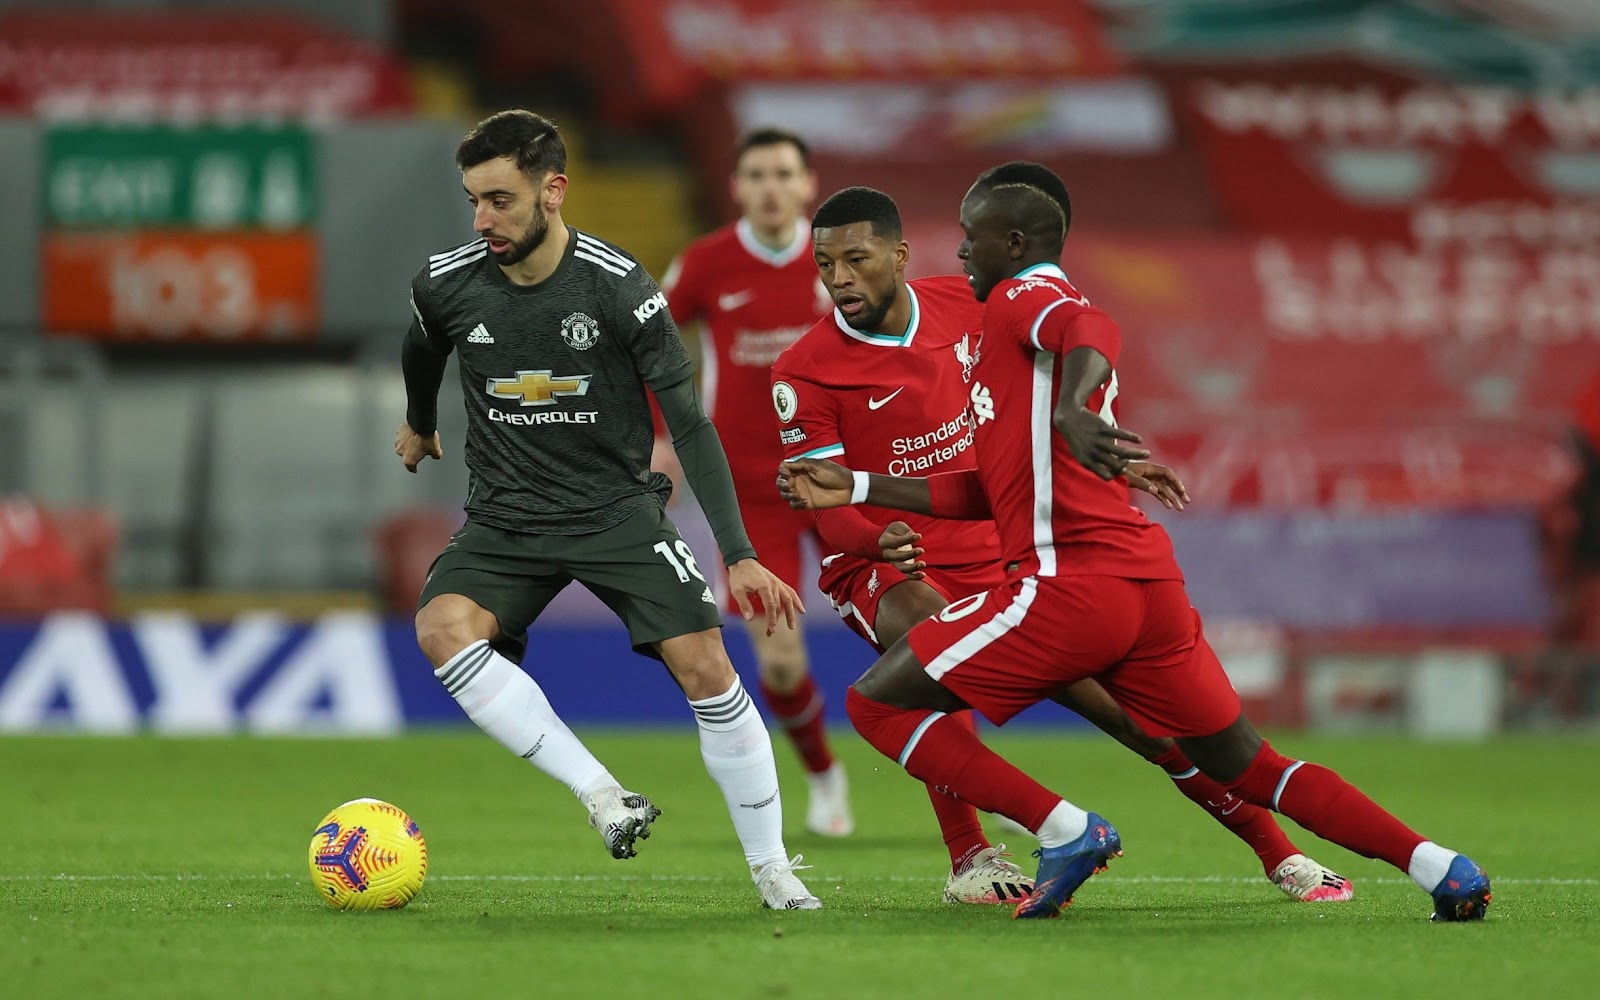 Liverpool and Manchester United thrash out goalless draw which will please  Ole Gunnar Solskjaer